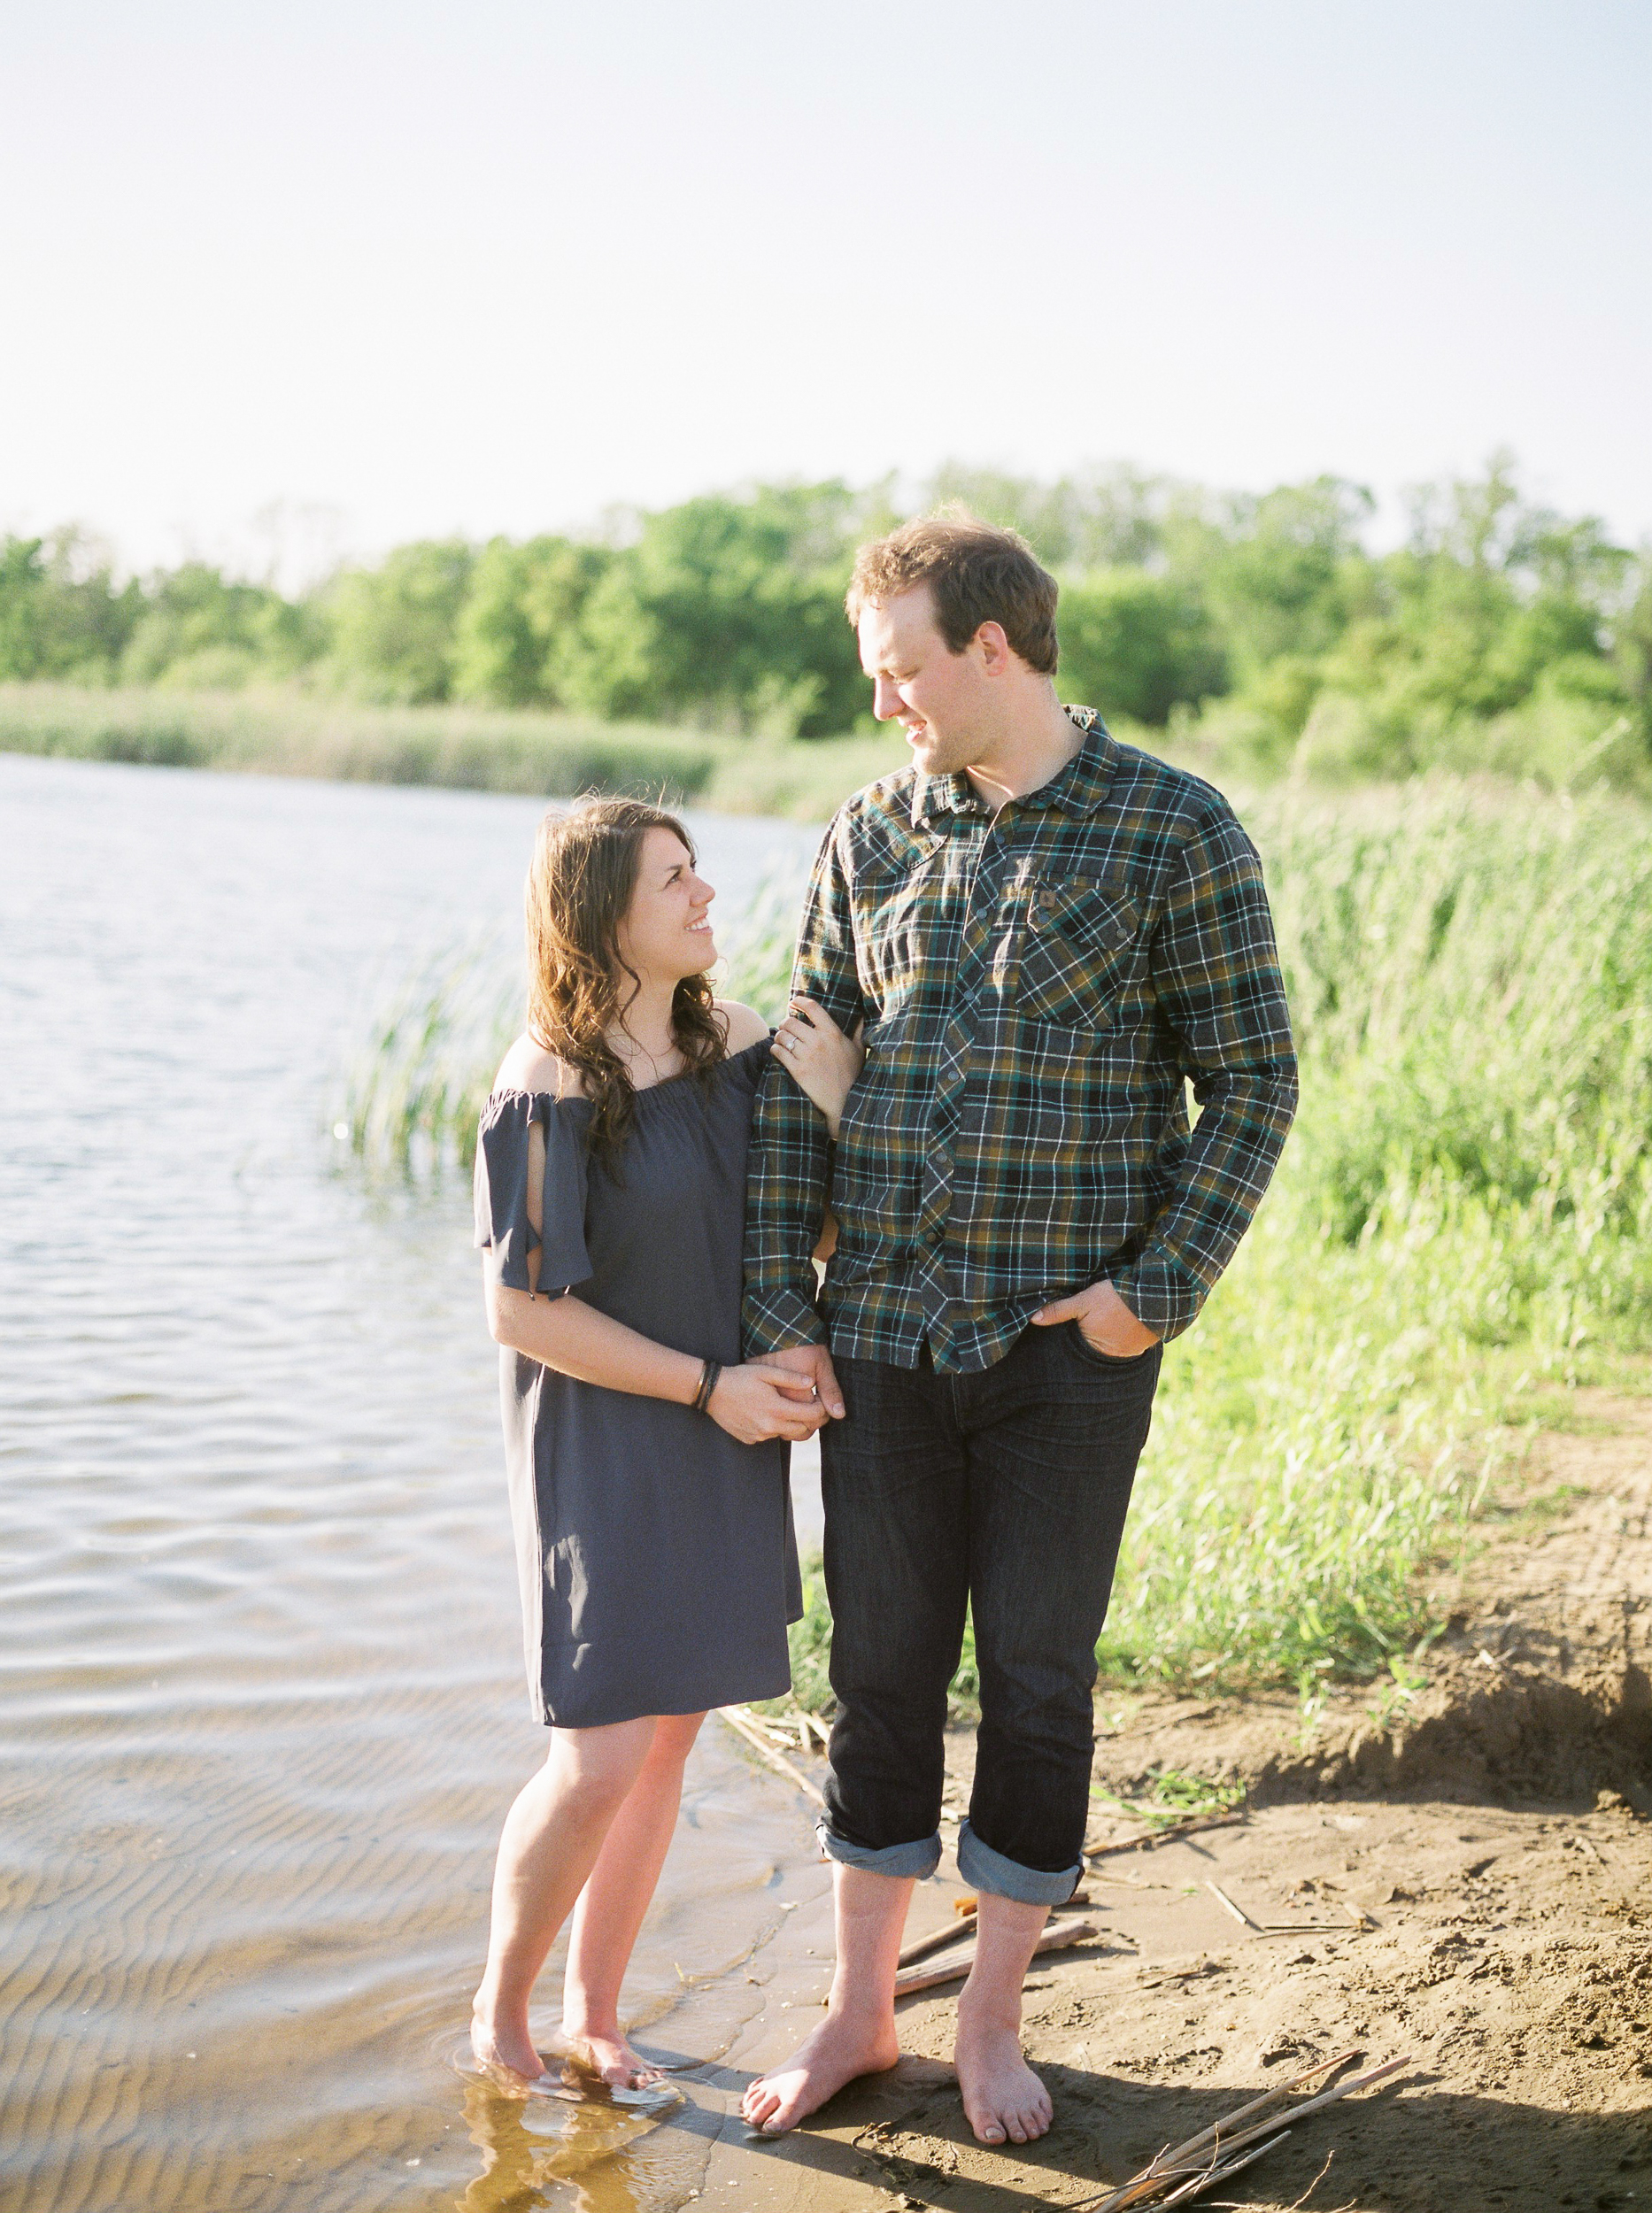 5 Things to know about engagement sessions - Summertime Engagement photos - Engagement session outfit ideas - Engagement photos by a lake - Winnipeg Wedding Photographer - Keila Marie Photography